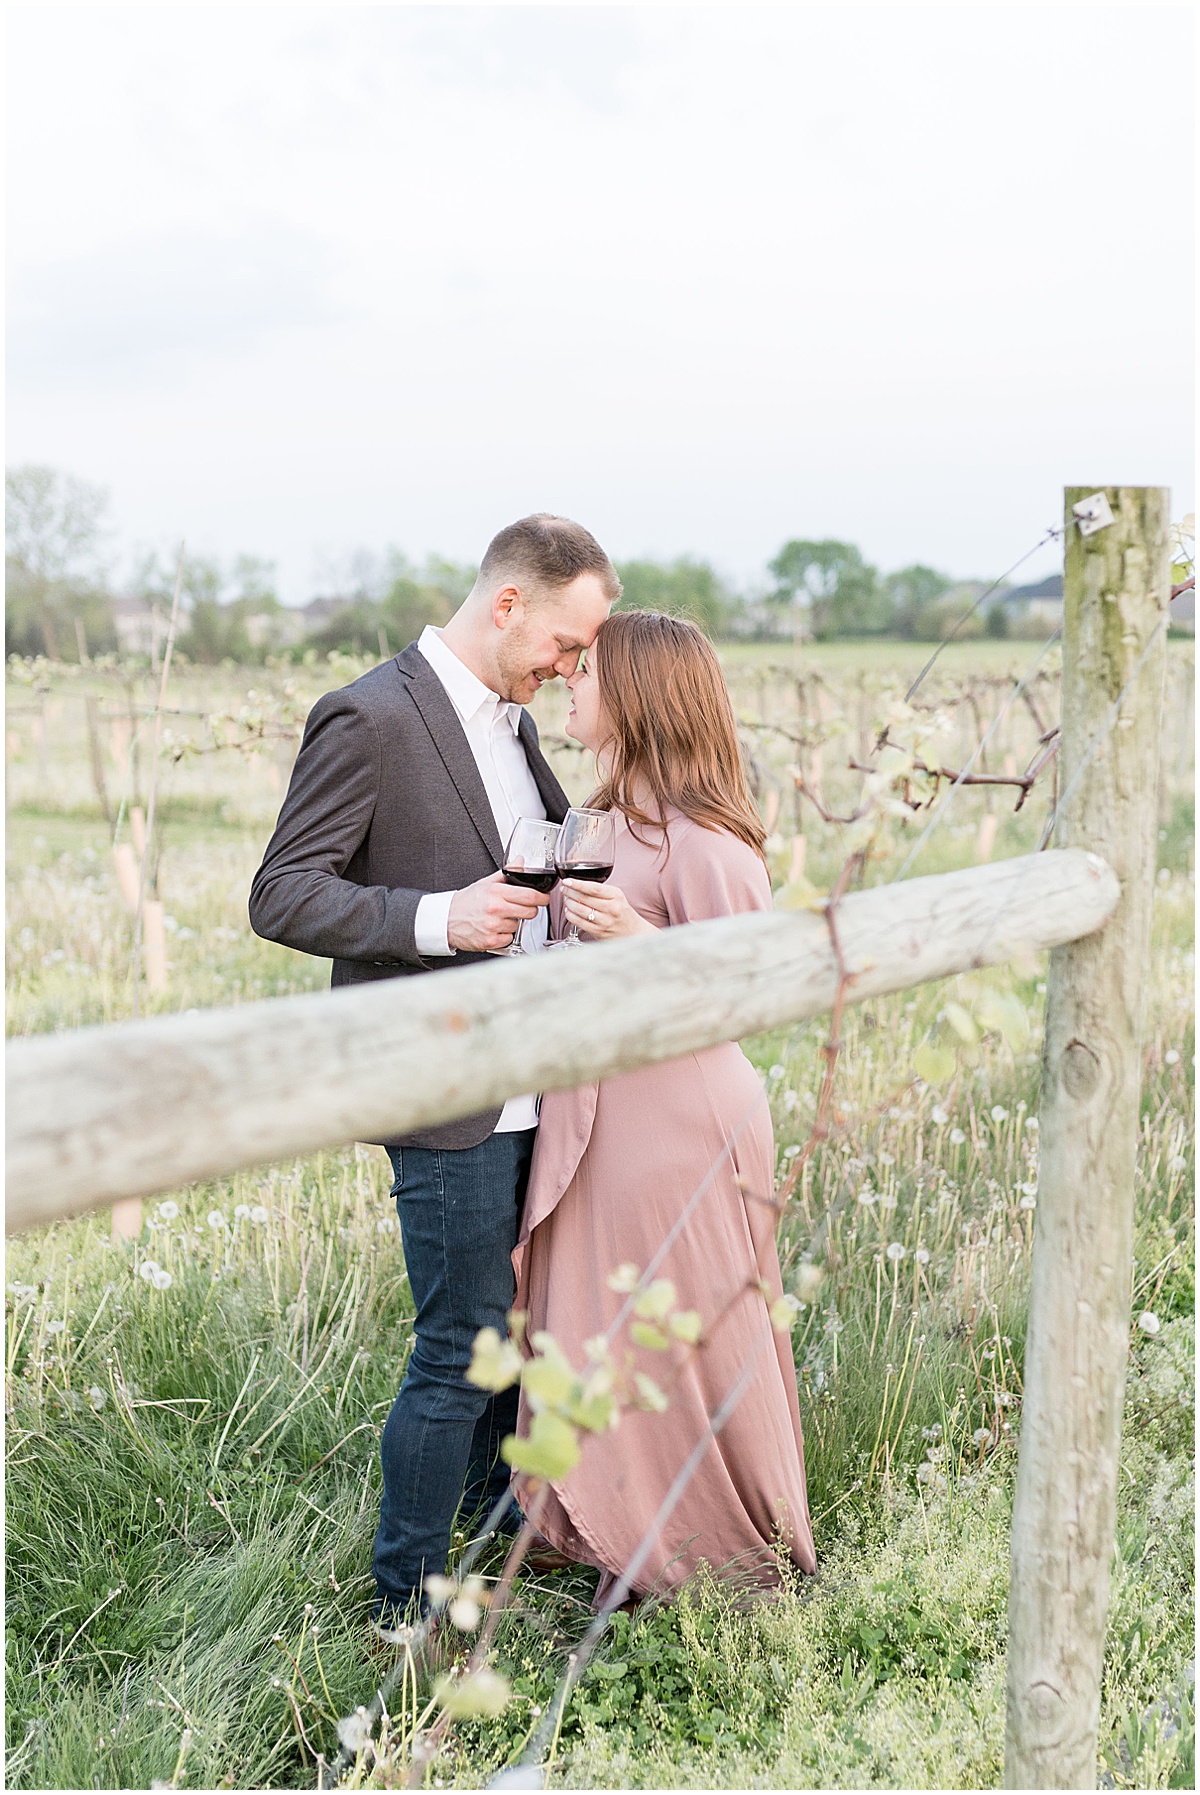 Couple drinking wine in winery fields during photos by Indianapolis wedding photographer Victoria Rayburn Photography